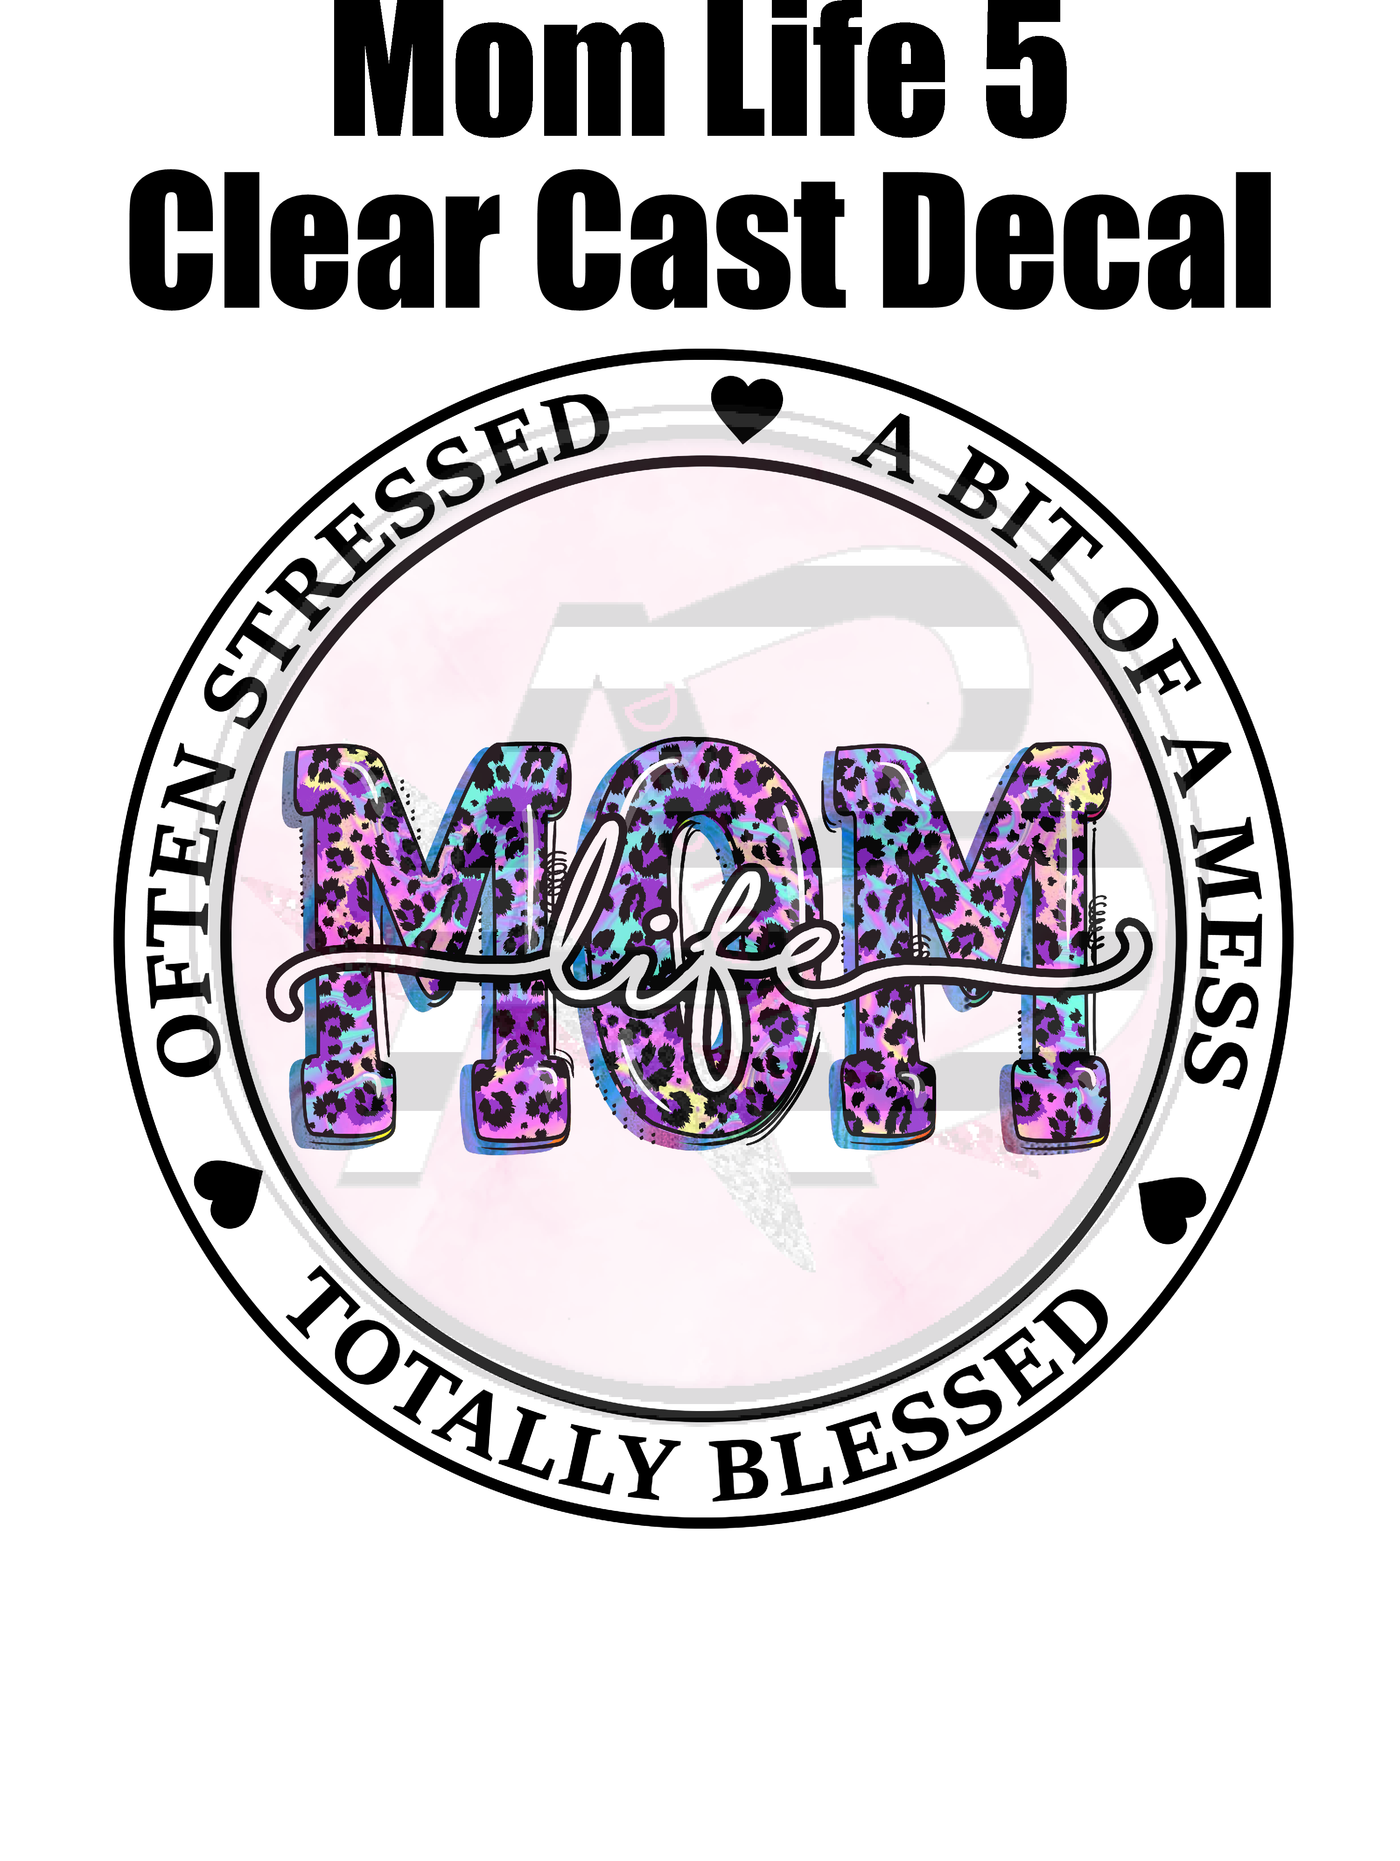 Mom Life 5 - Clear Cast Decal